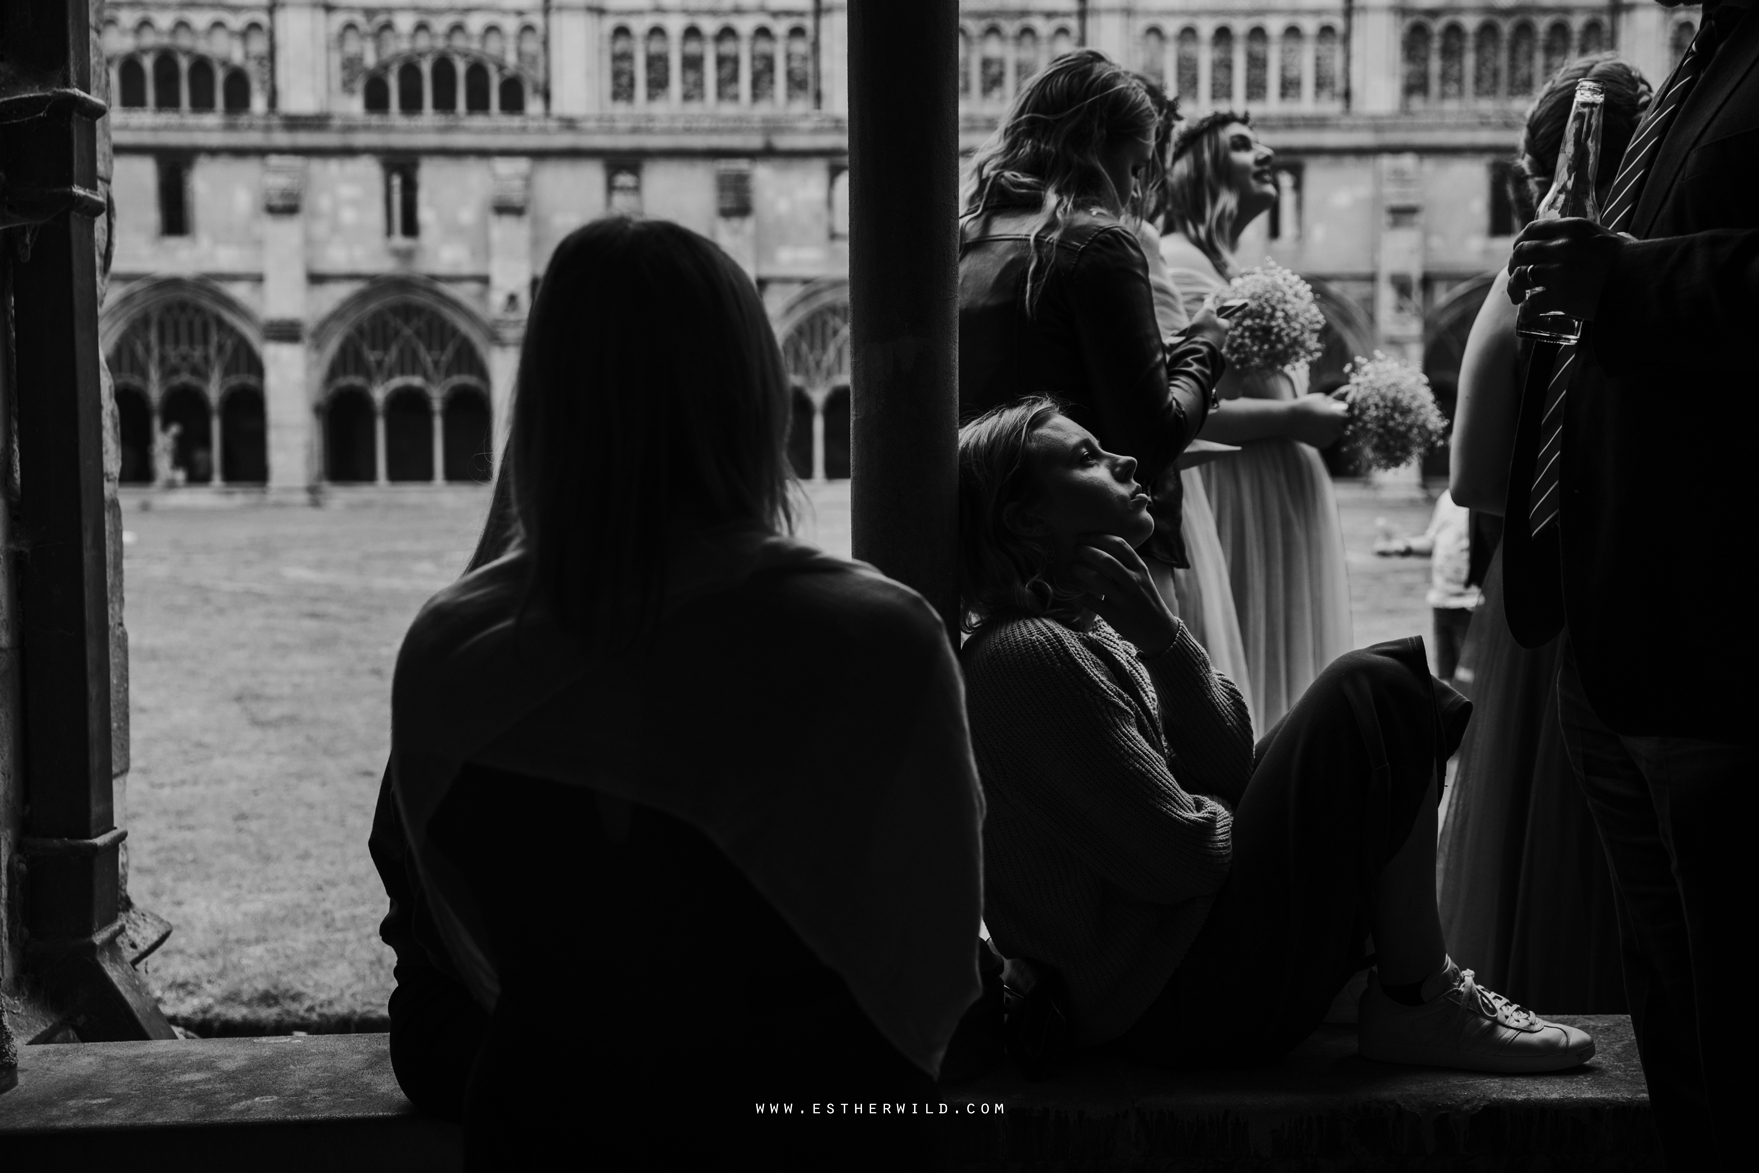 Norwich_Castle_Arcade_Grosvenor_Chip_Birdcage_Cathedral_Cloisters_Refectory_Wedding_Photography_Esther_Wild_Photographer_Norfolk_Kings_Lynn_3R8A2125-2.jpg